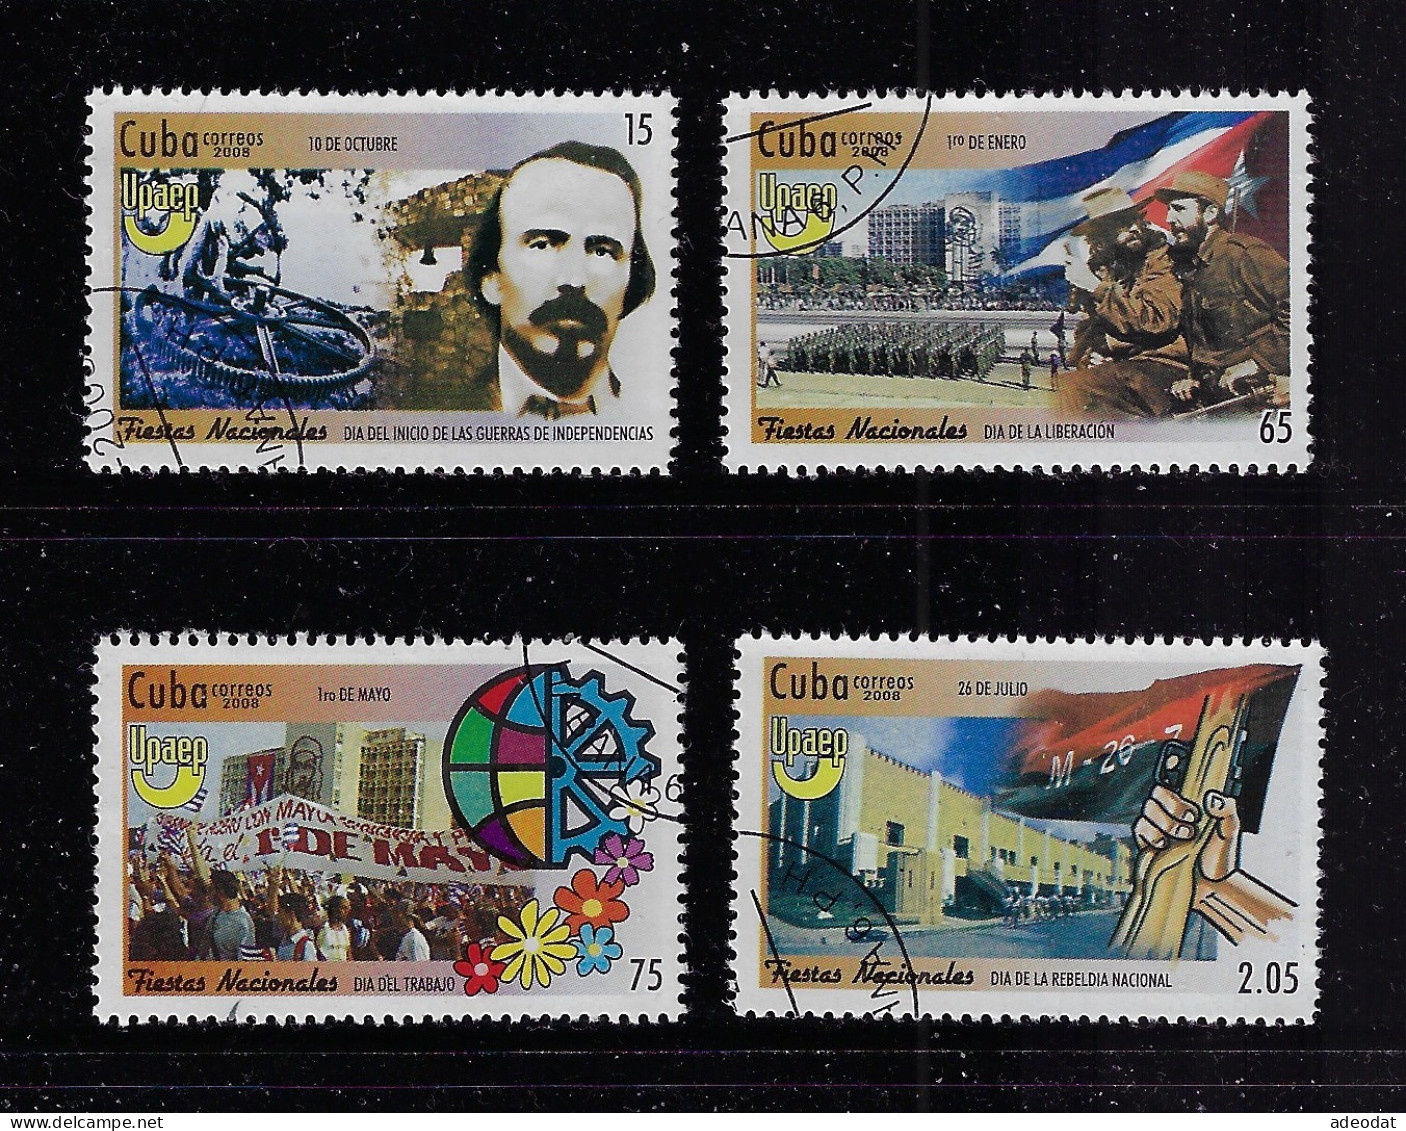 CUBA 2008 STAMPWORLD 5151-5154 CANCELLED - Used Stamps